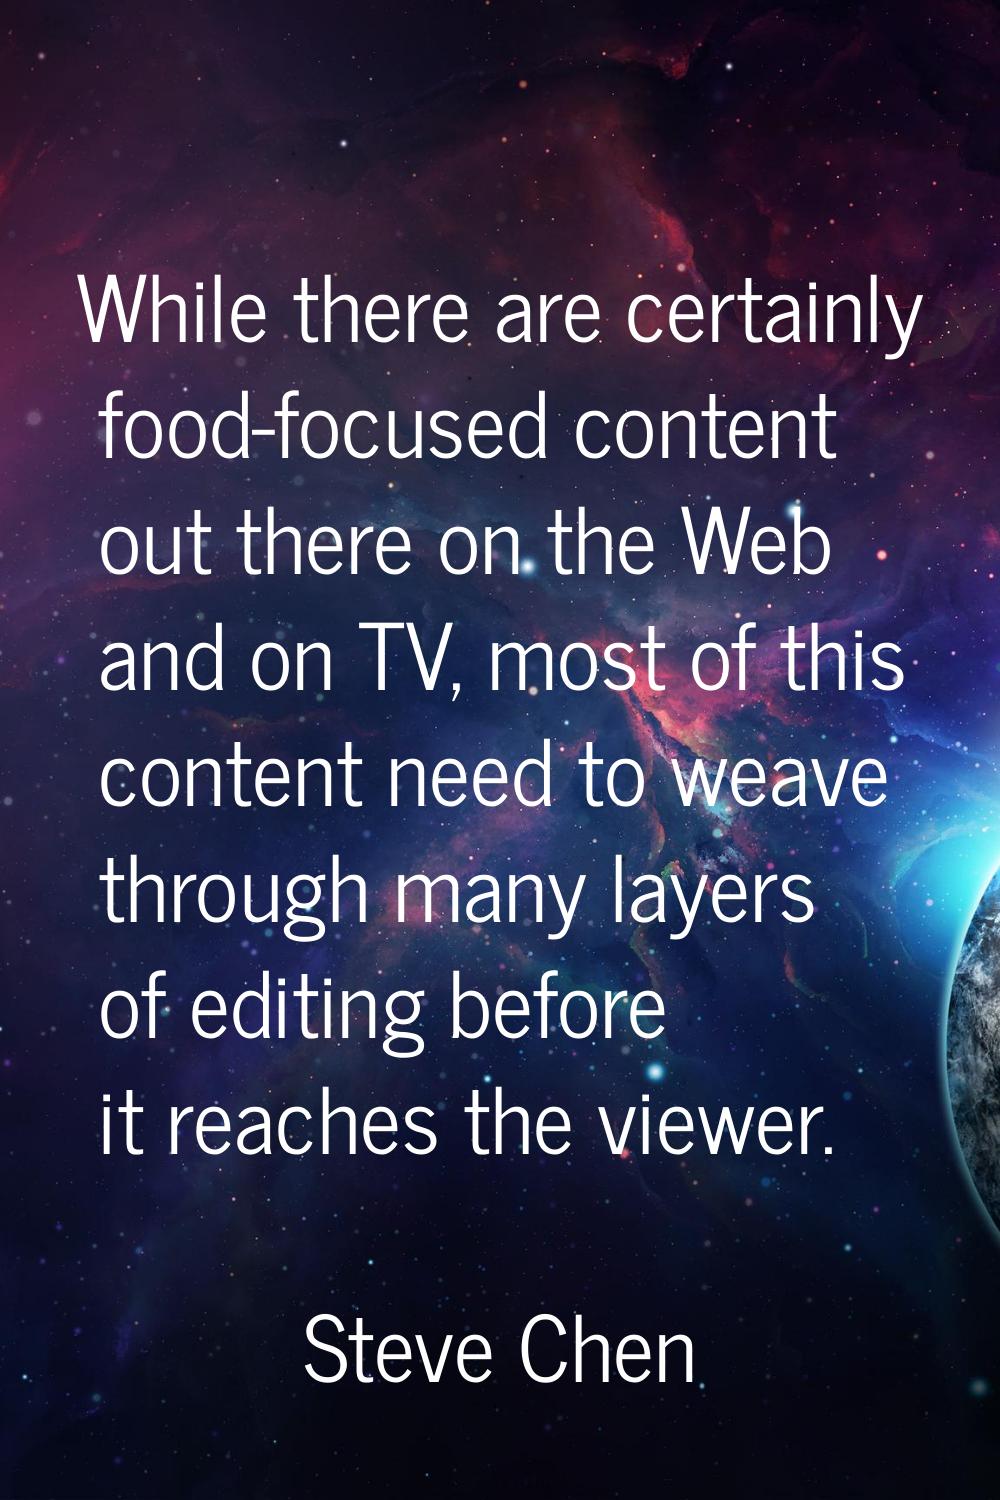 While there are certainly food-focused content out there on the Web and on TV, most of this content